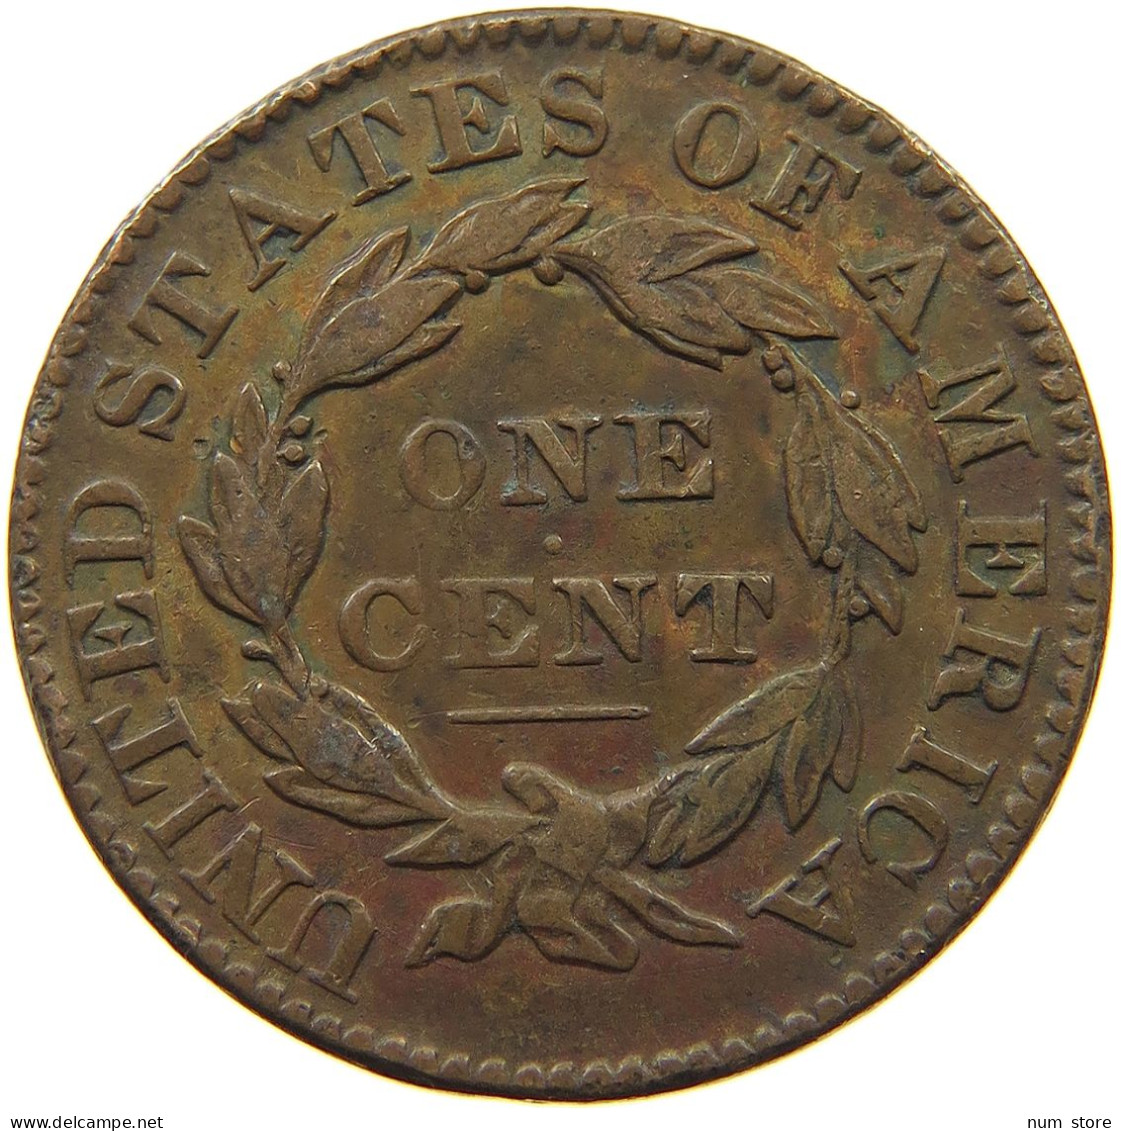 UNITED STATES OF AMERICA LARGE CENT 1831 MATRON HEAD #t110 0017 - 1816-1839: Coronet Head (Tête Couronnée)